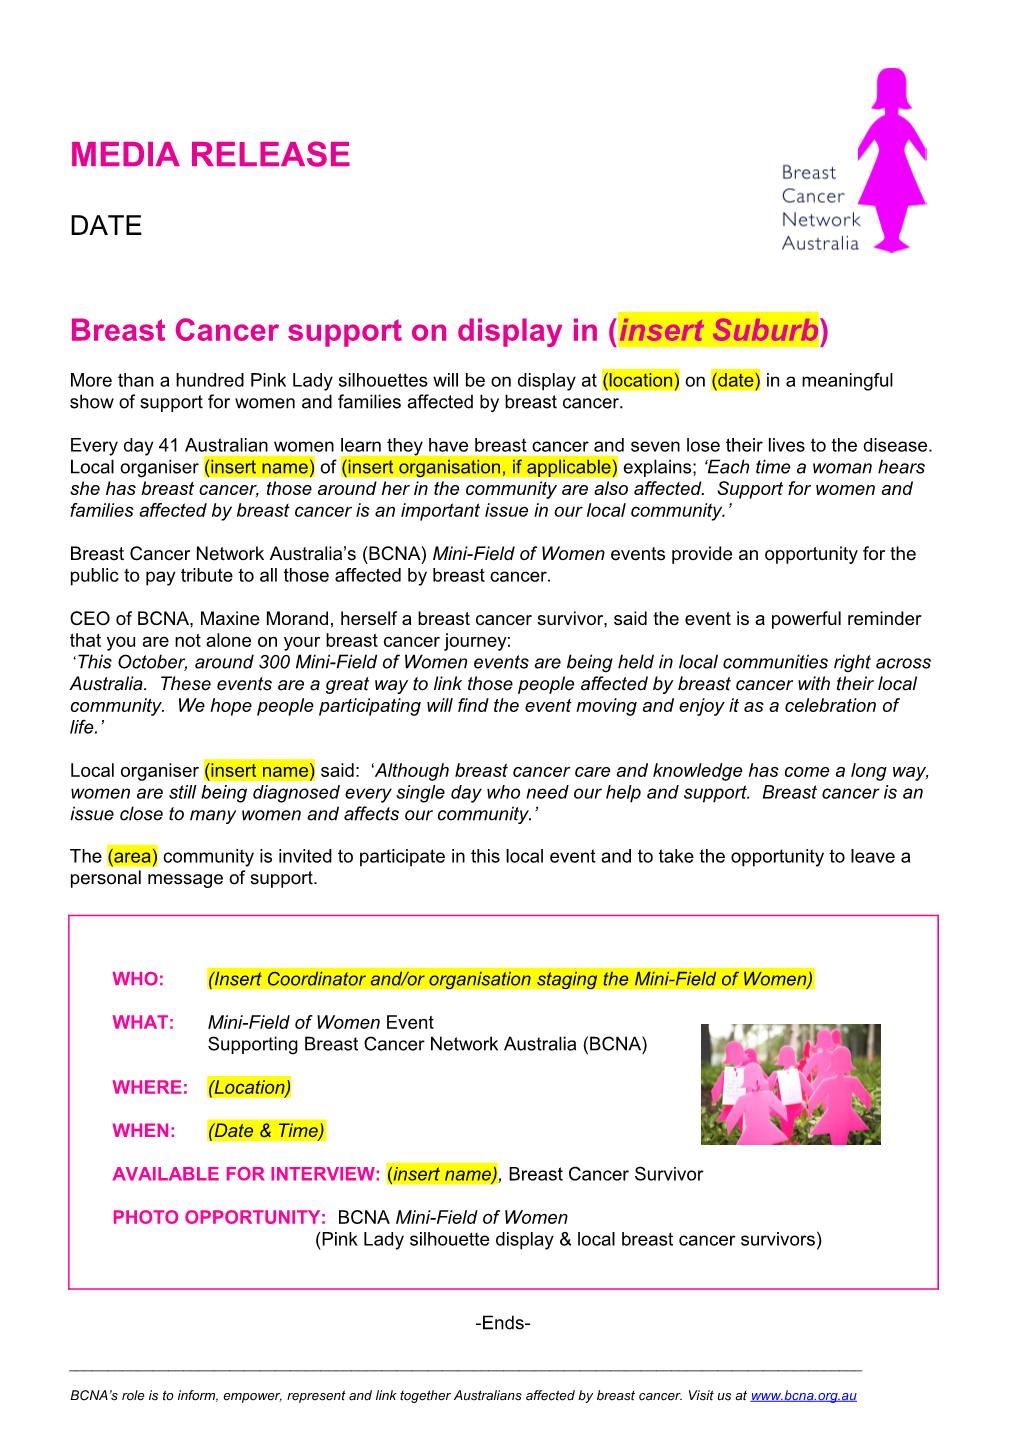 Breast Cancer Support on Display in (Insert Suburb)